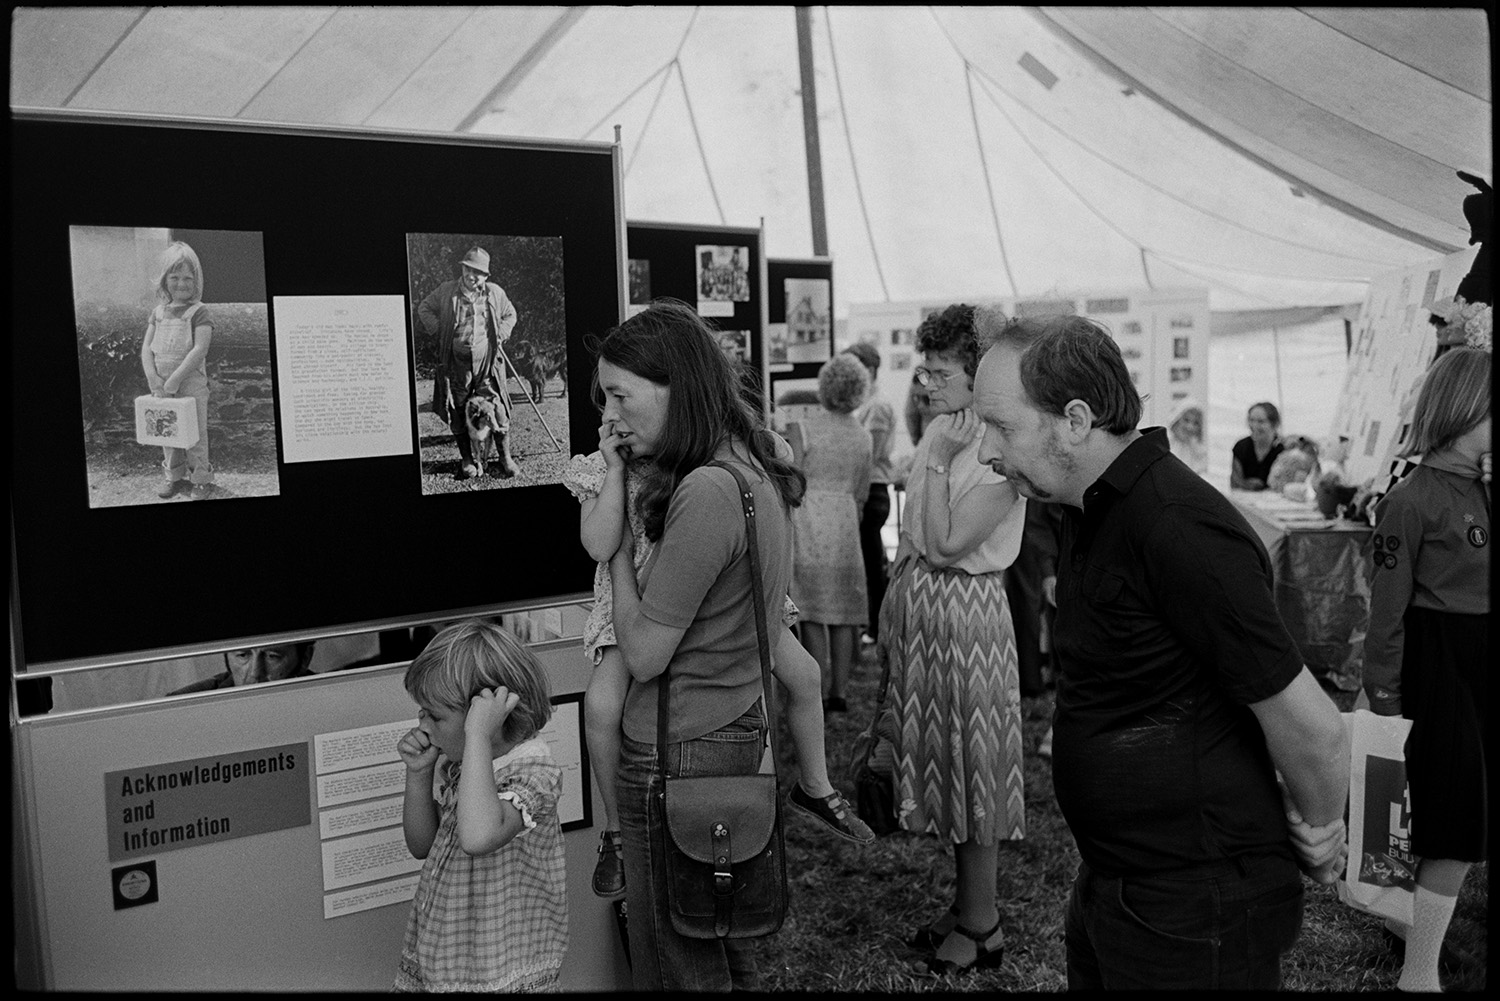 North Devon Show, Prize cattle, sheep, exhibitions etc.
[Interior of a marquee at the North Devon Show, near Alverdiscott. Visitors, including men, women and children, are looking at display boards showing photographs and information by James Ravilious. A woman is carrying a small girl in the foreground.]